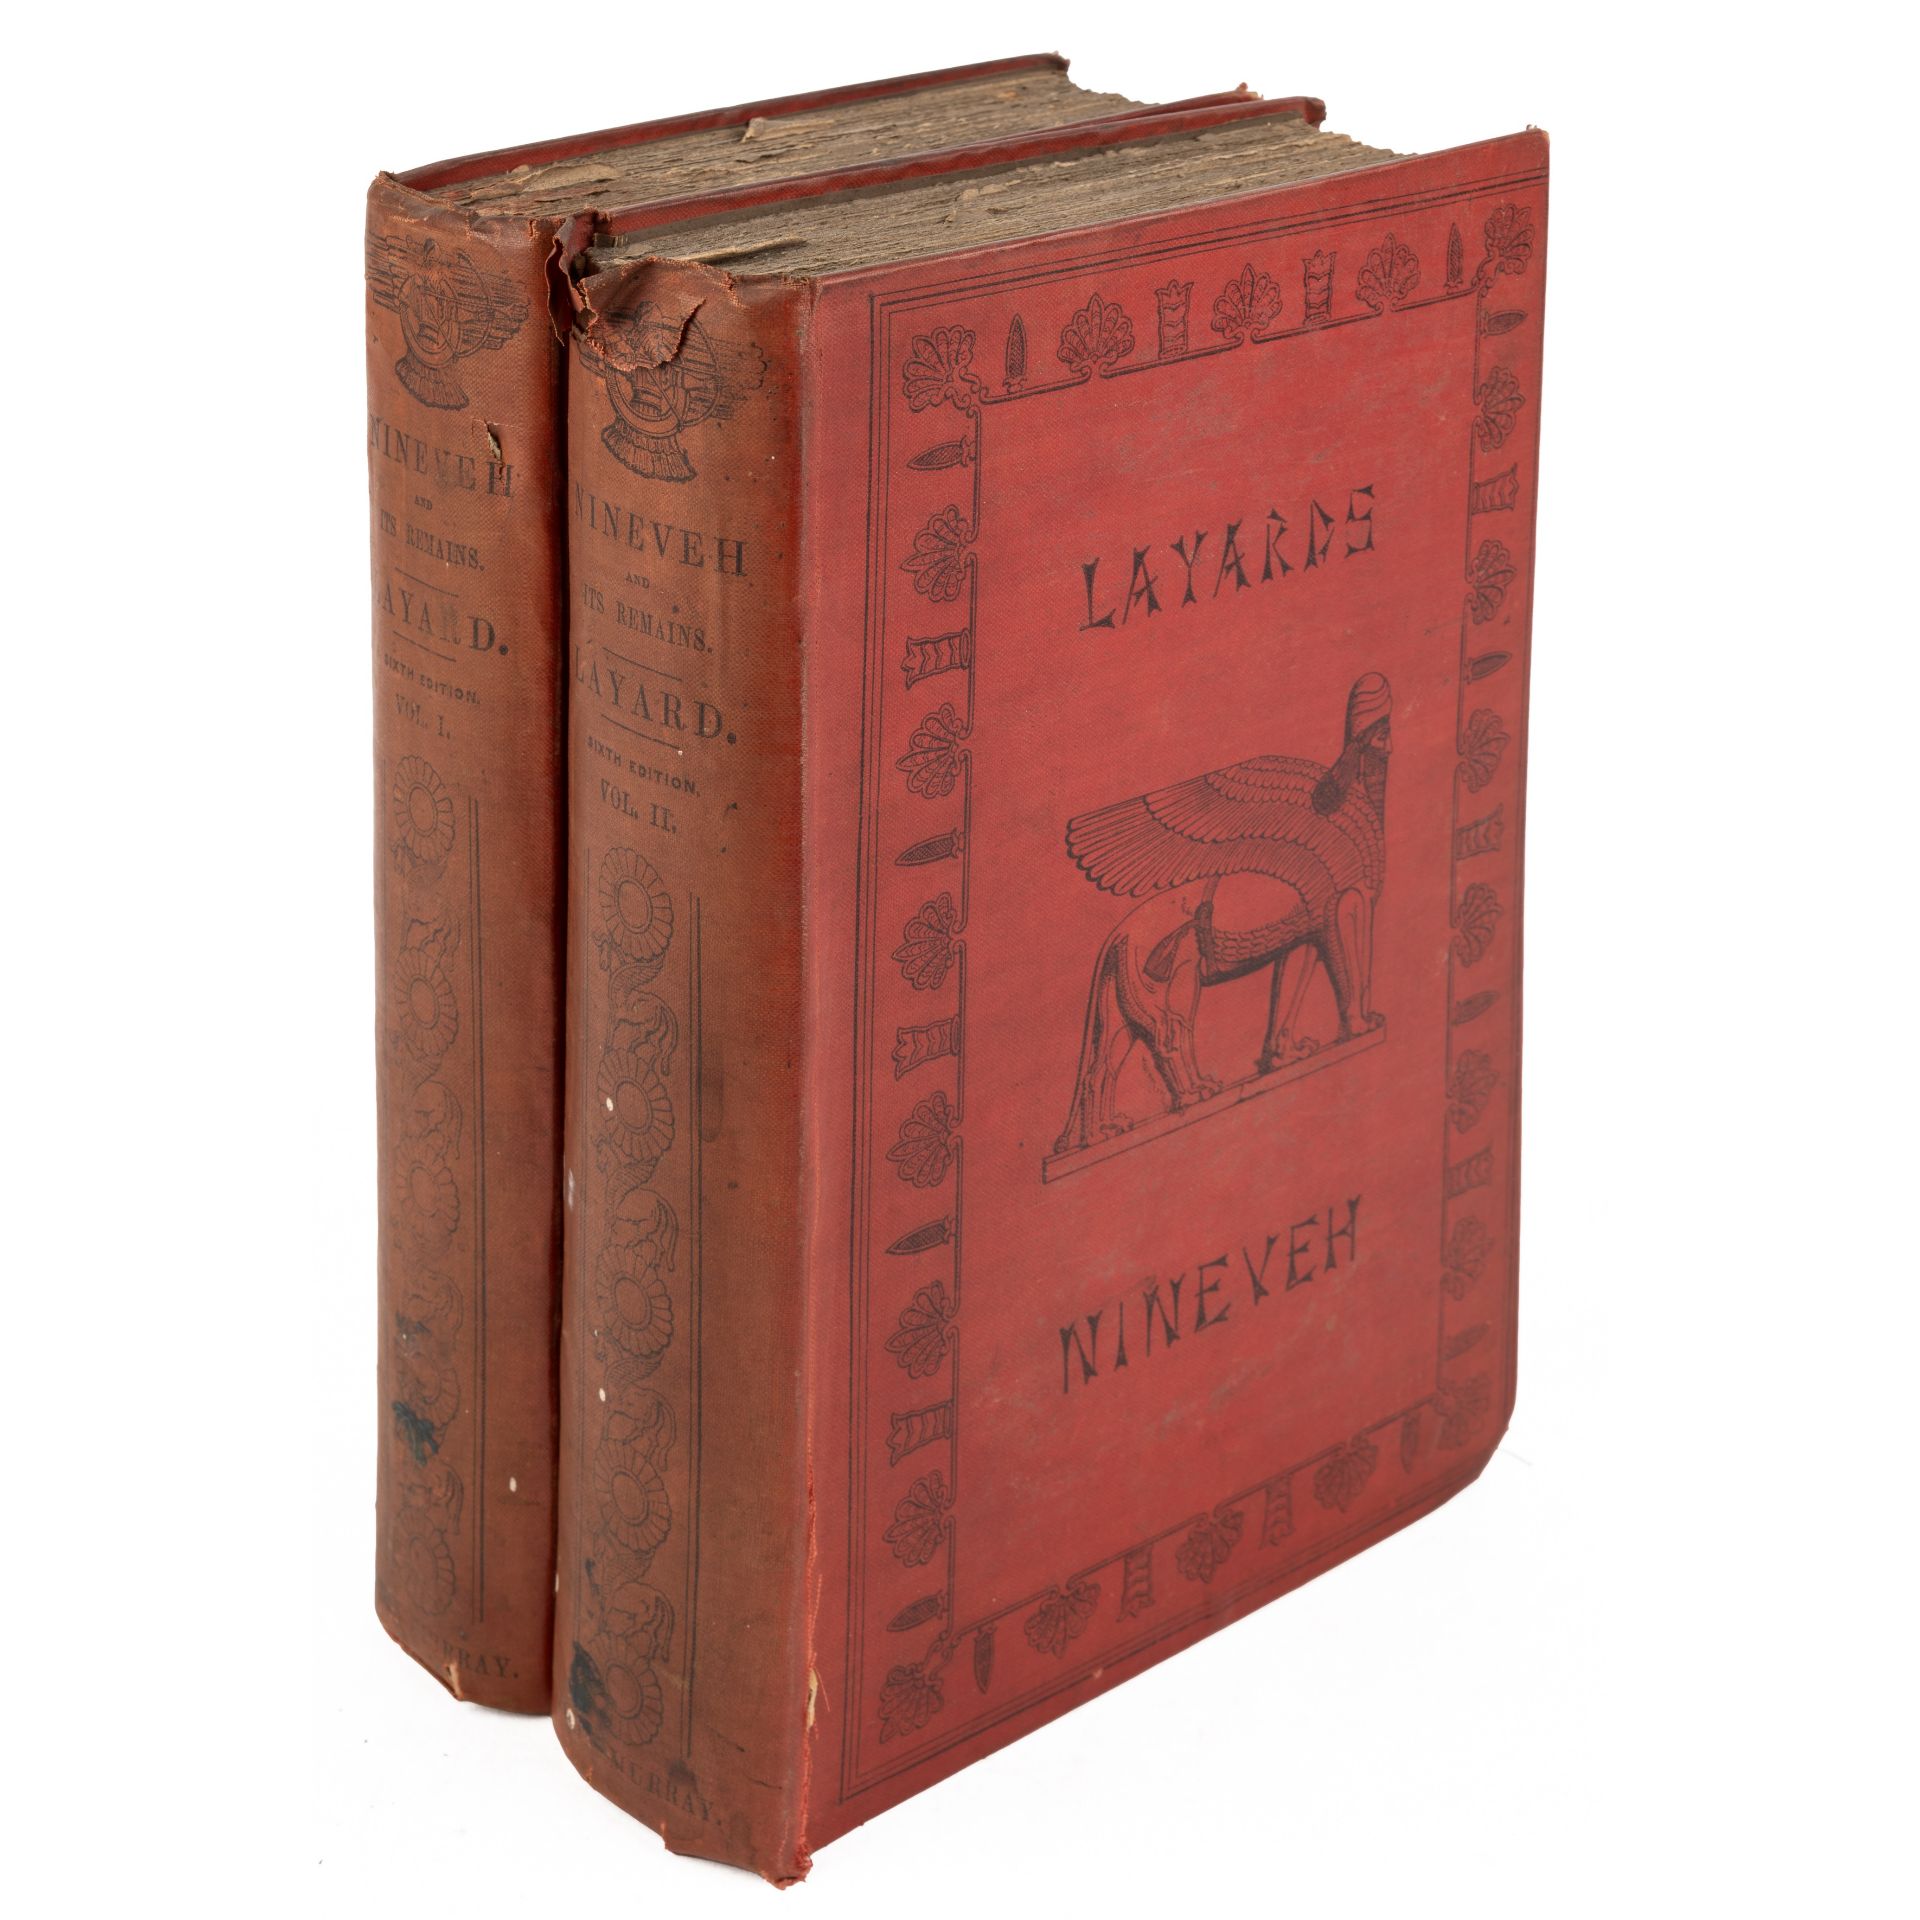 Layard (Austen Henry) 'Nineveh and it's Remains'. 6th Ed. 2vols. John Murray, London 1854 with